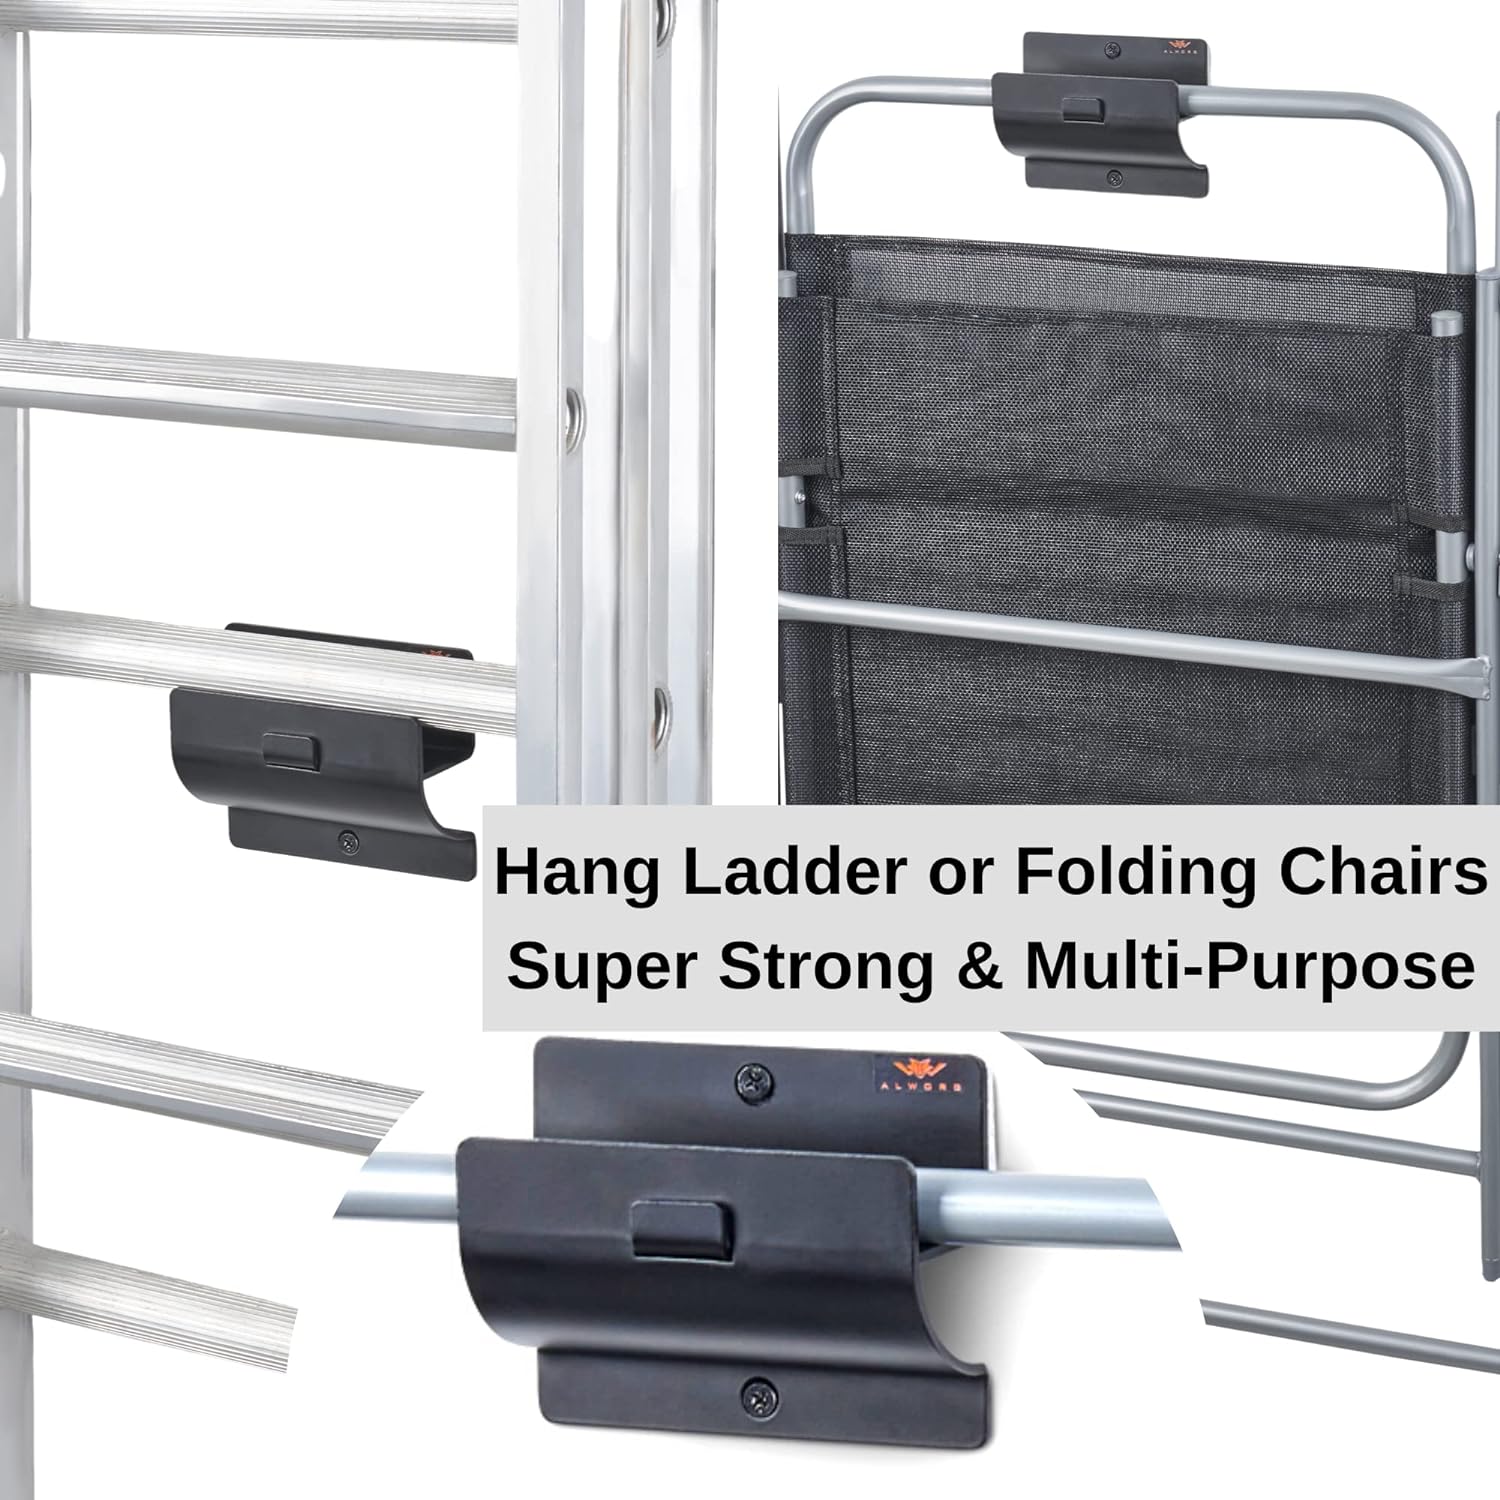 &#226;&#128;&#142;ALWORG Ladder Hanger for Garage Wall - Heavy Duty Utility Hook for Wall Mount Ladder Storage. Versatile Tool Holder to Maximize Space